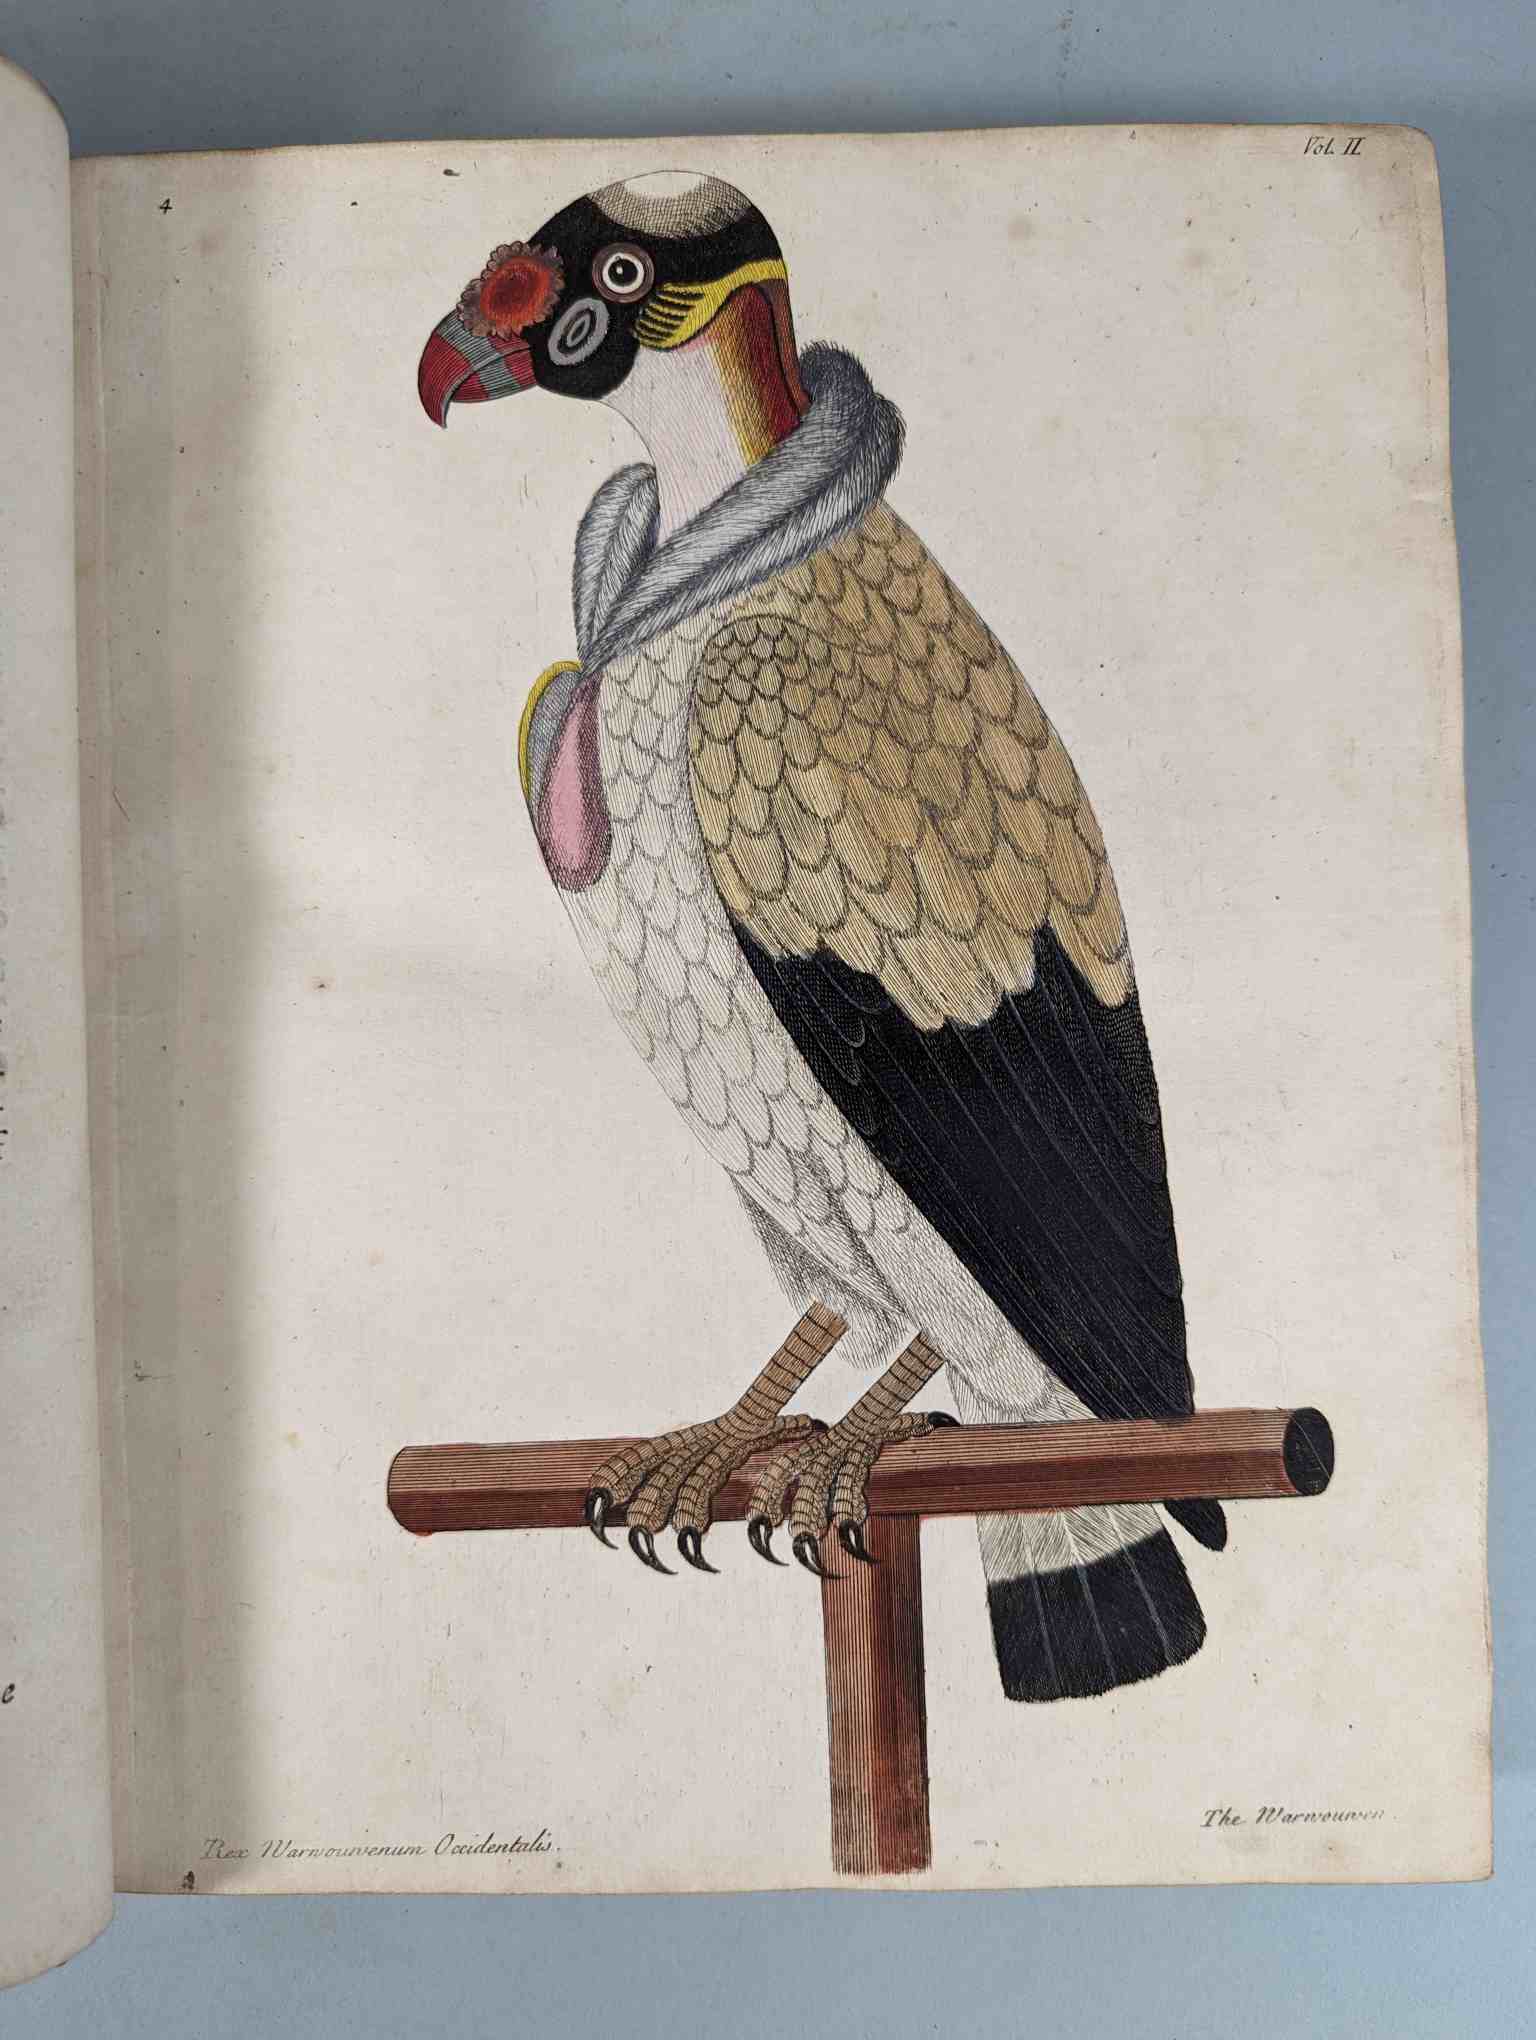 ALBIN, Eleazar. A Natural History of Birds, to which are added, Notes and Observations by W. - Image 108 of 208